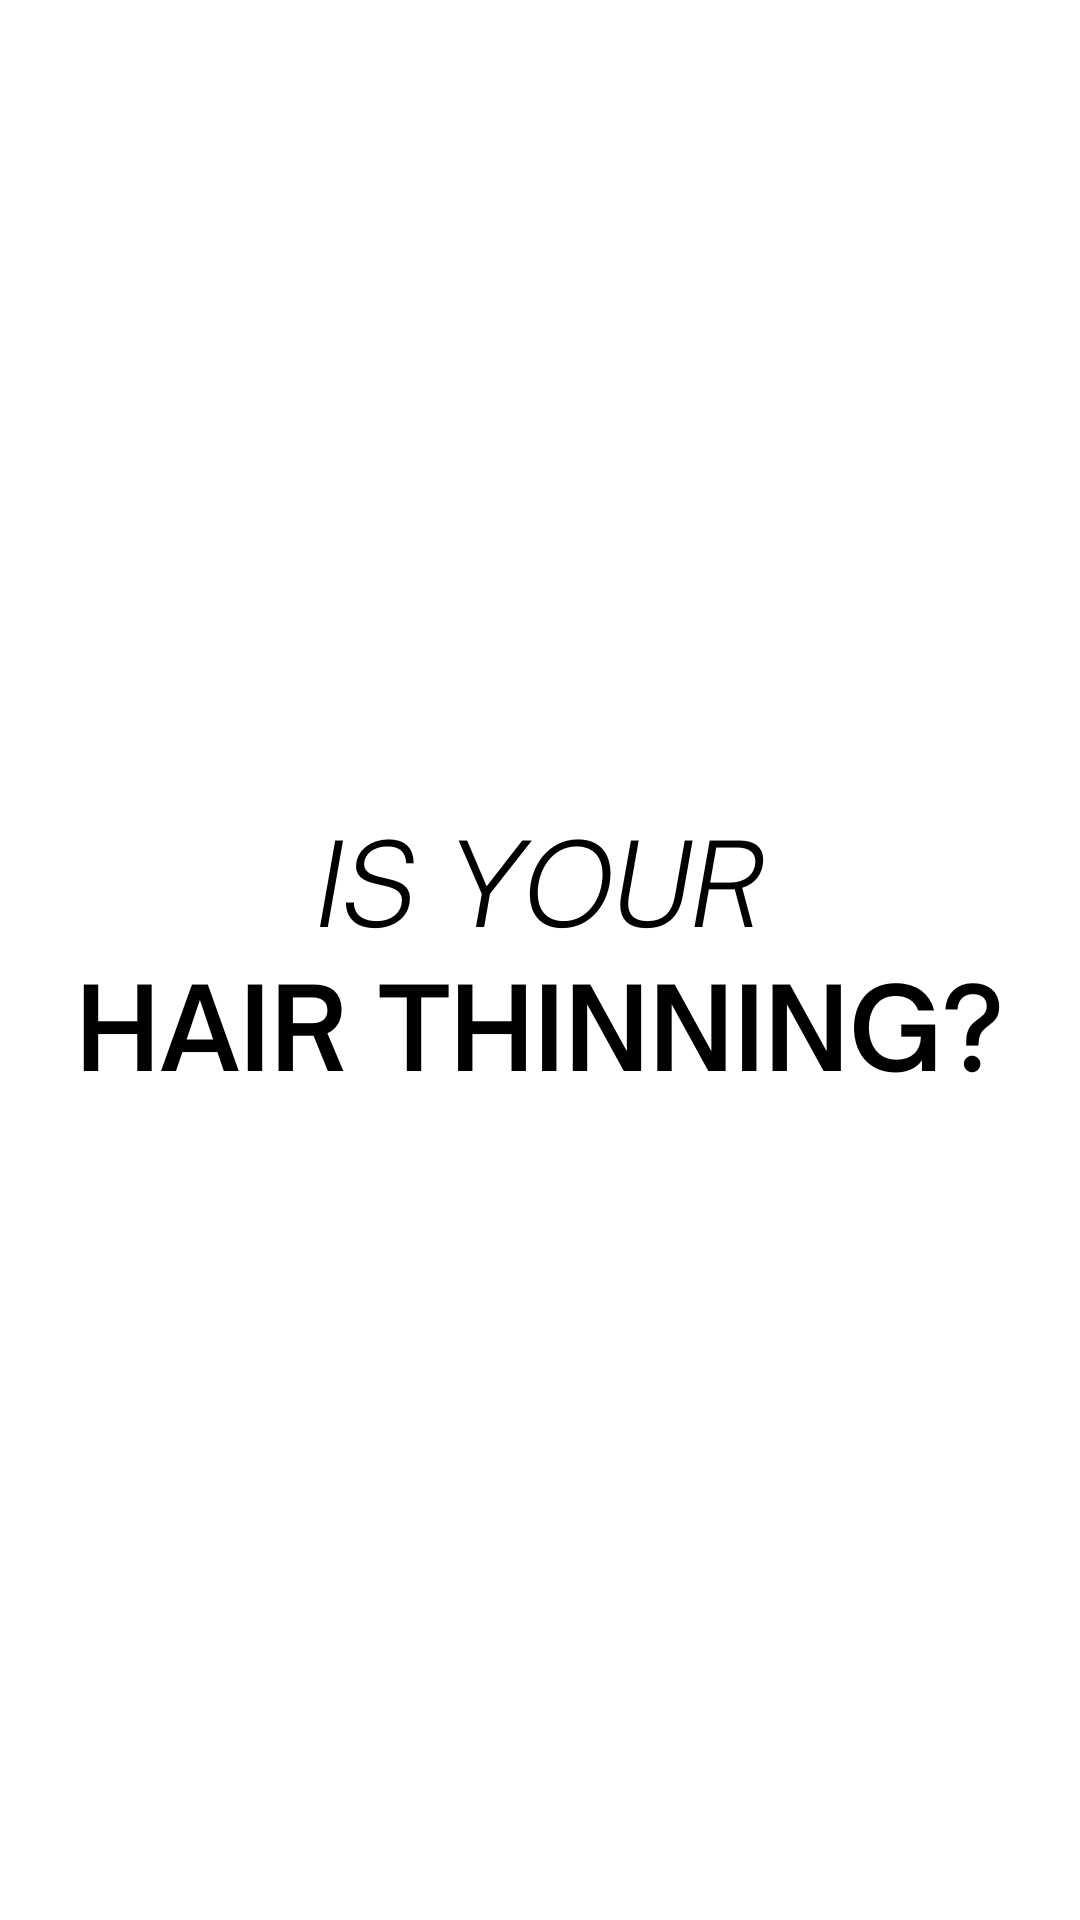 Is your hair thinning?